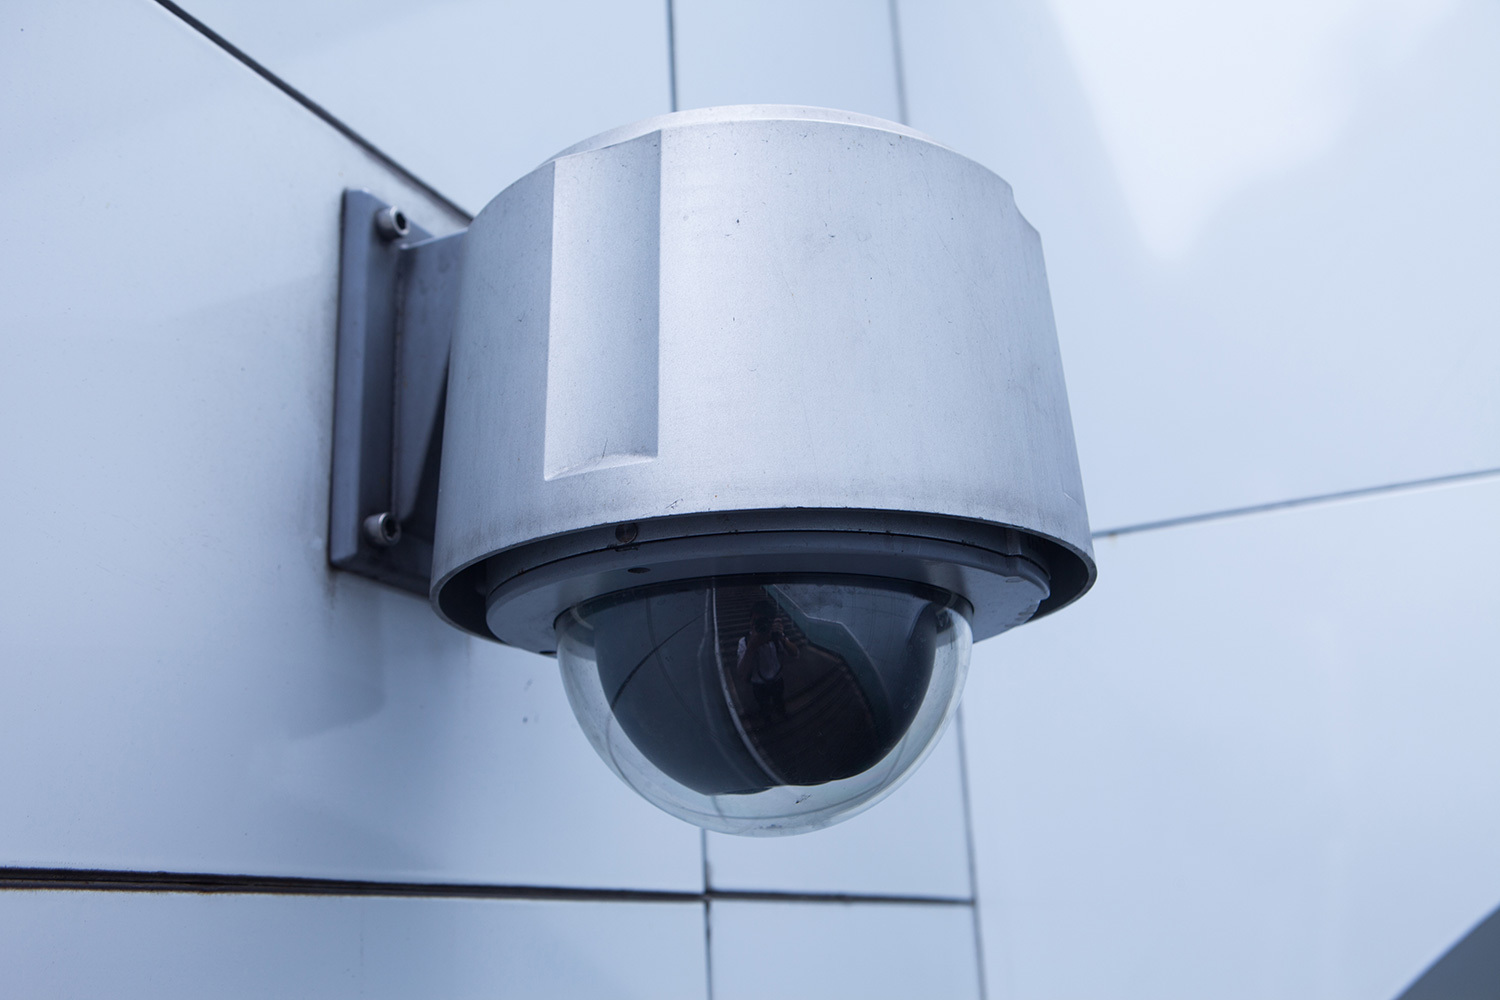 <span style="font-weight: bold;">Security cameras</span>